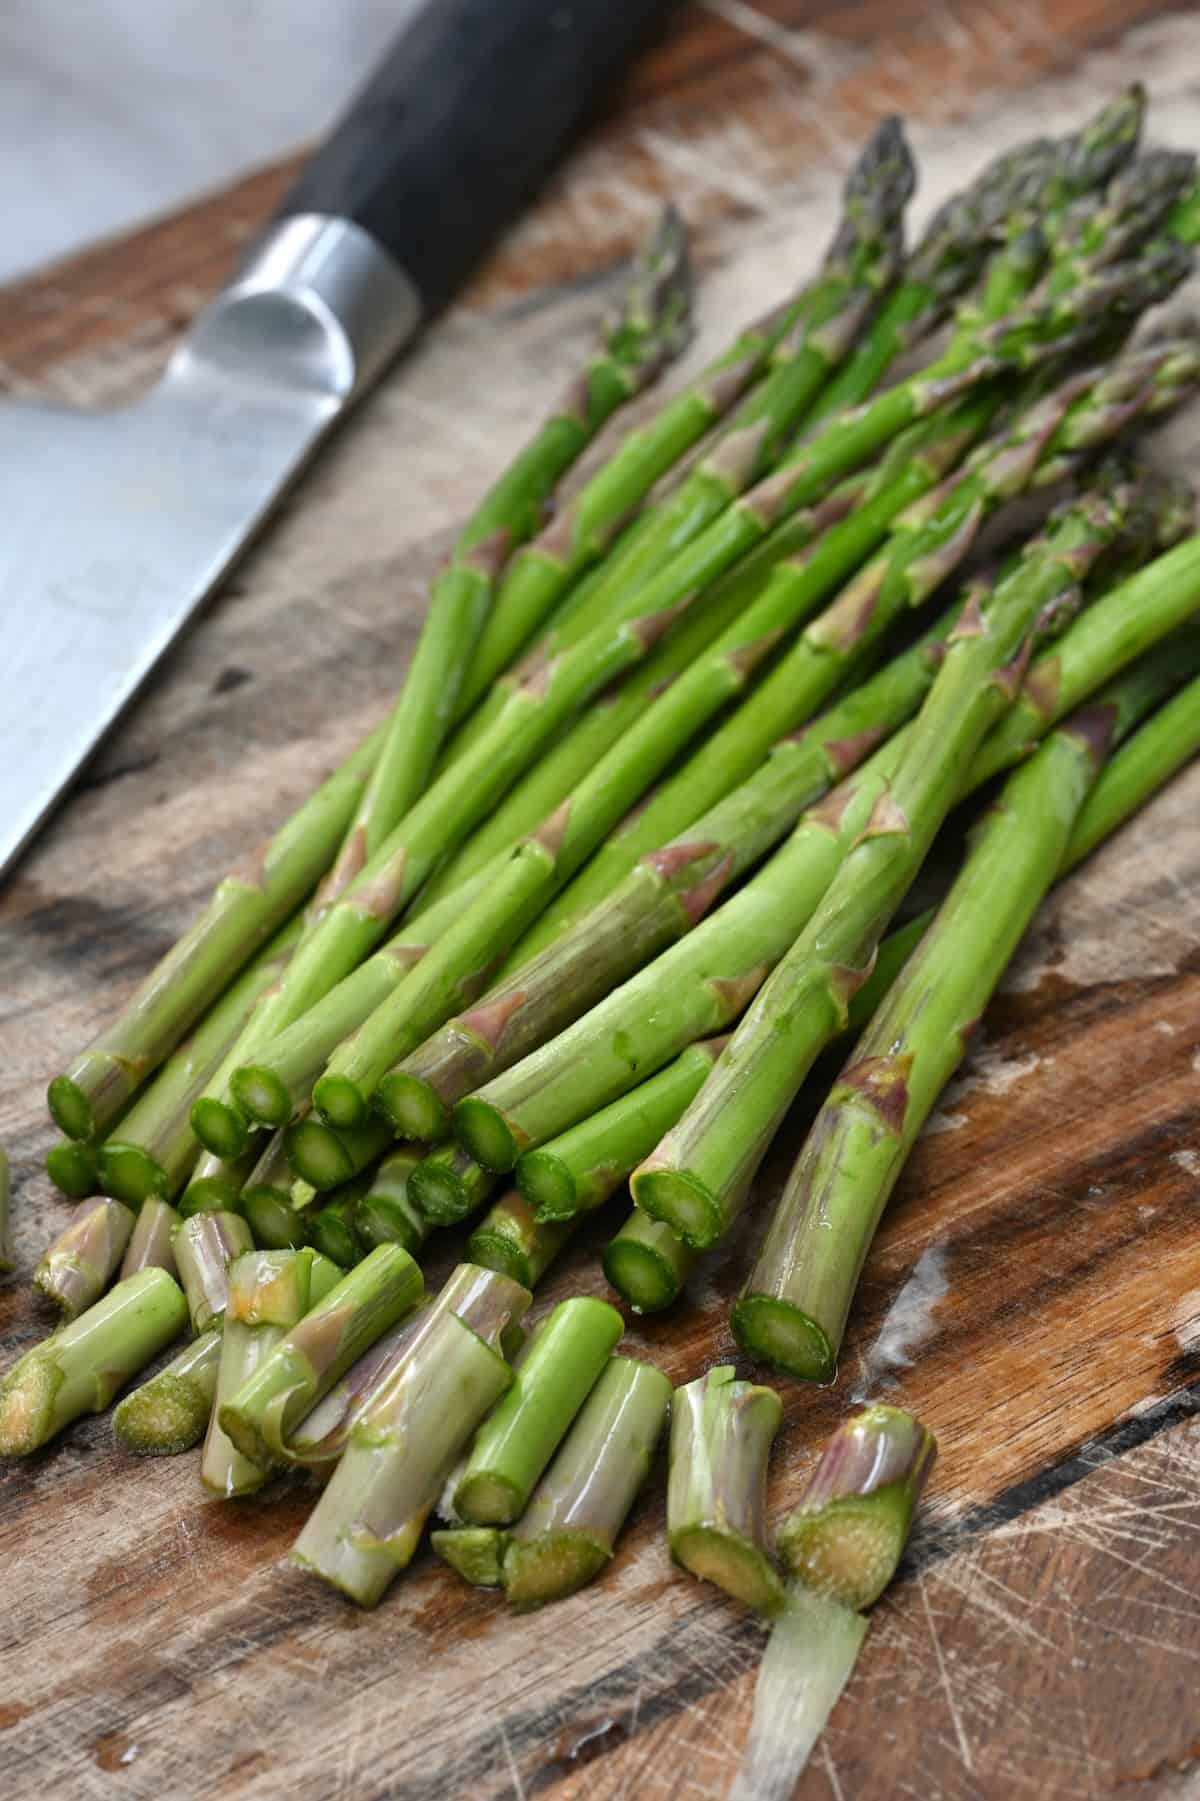 Asparagus with the ends cut off